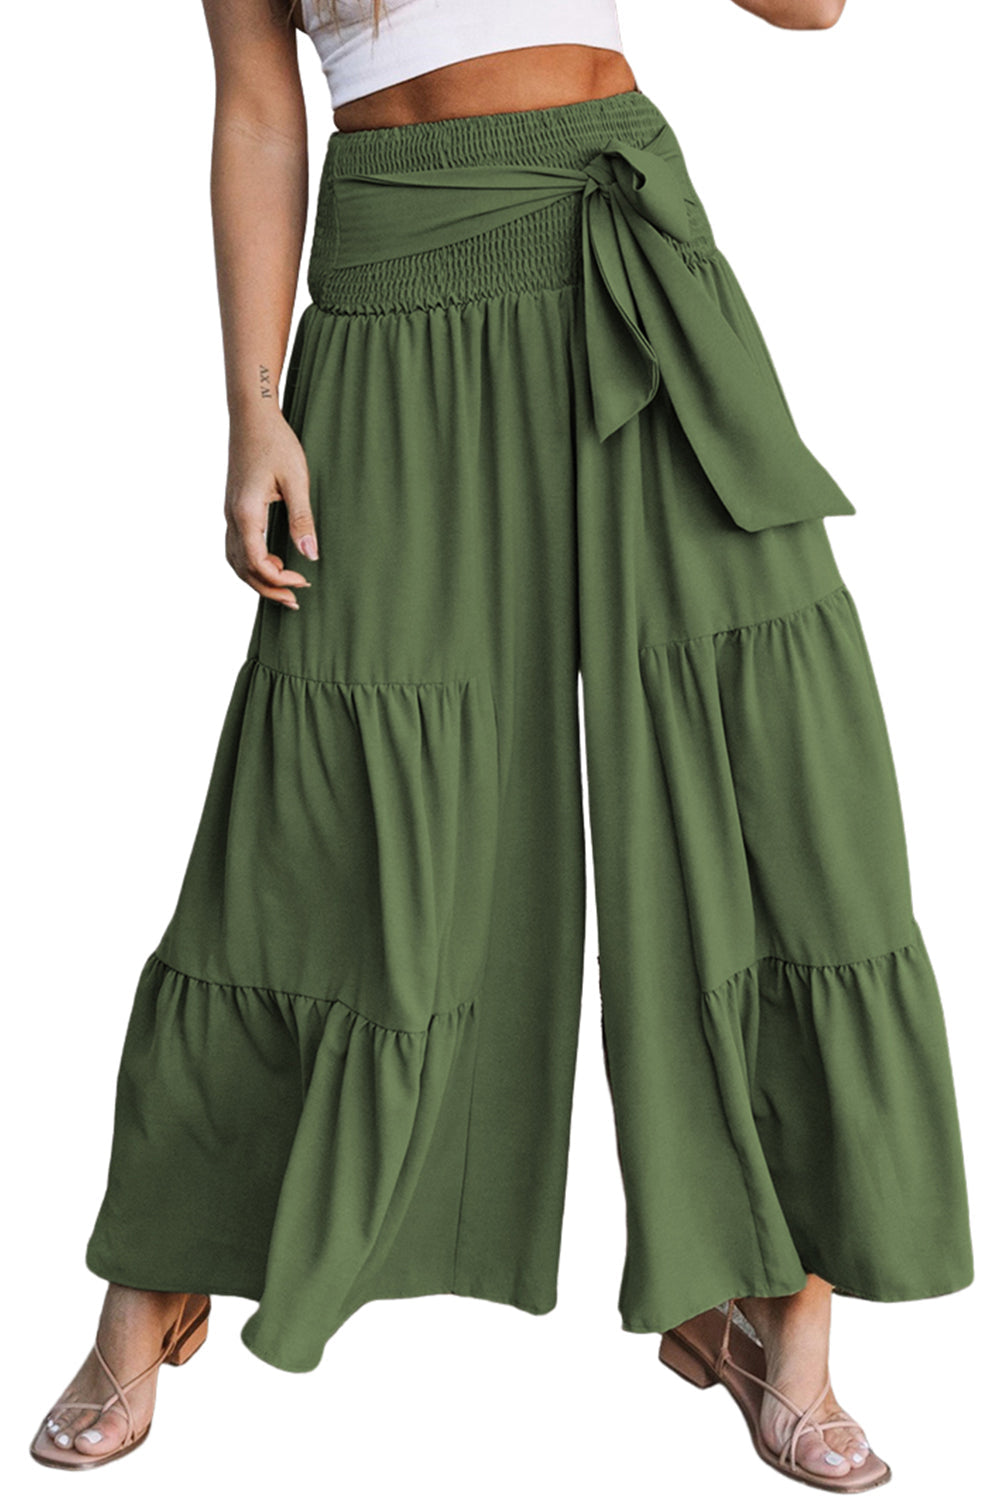 Lace up Smocked Waist Tiered Wide Leg Pants